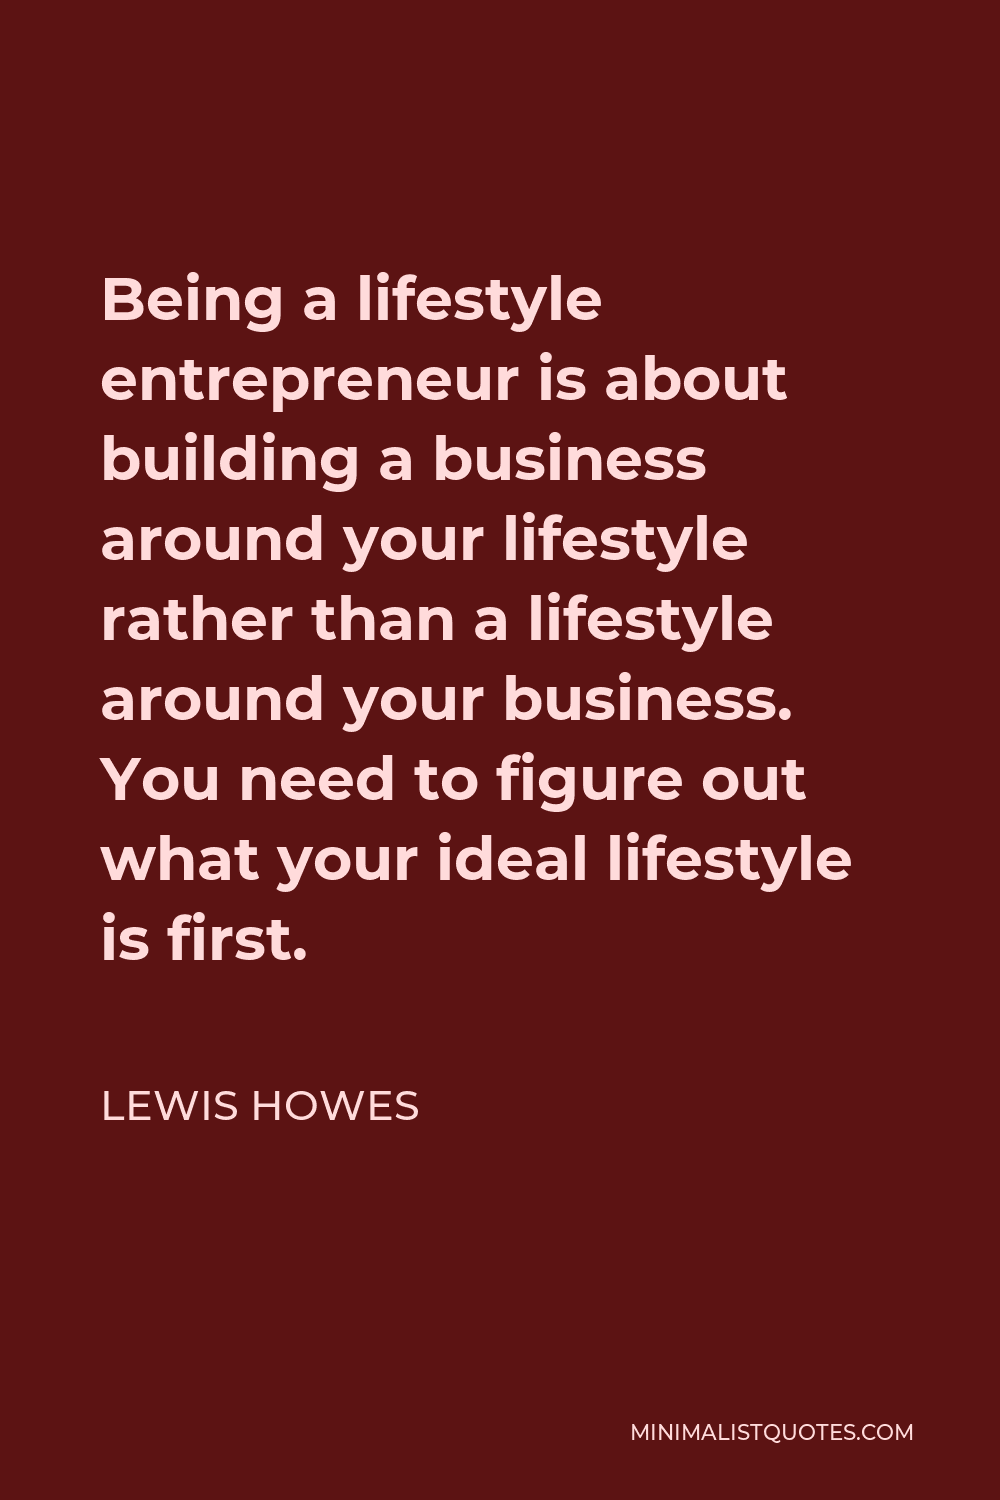 Lewis Howes Quote - Being a lifestyle entrepreneur is about building a business around your lifestyle rather than a lifestyle around your business. You need to figure out what your ideal lifestyle is first.